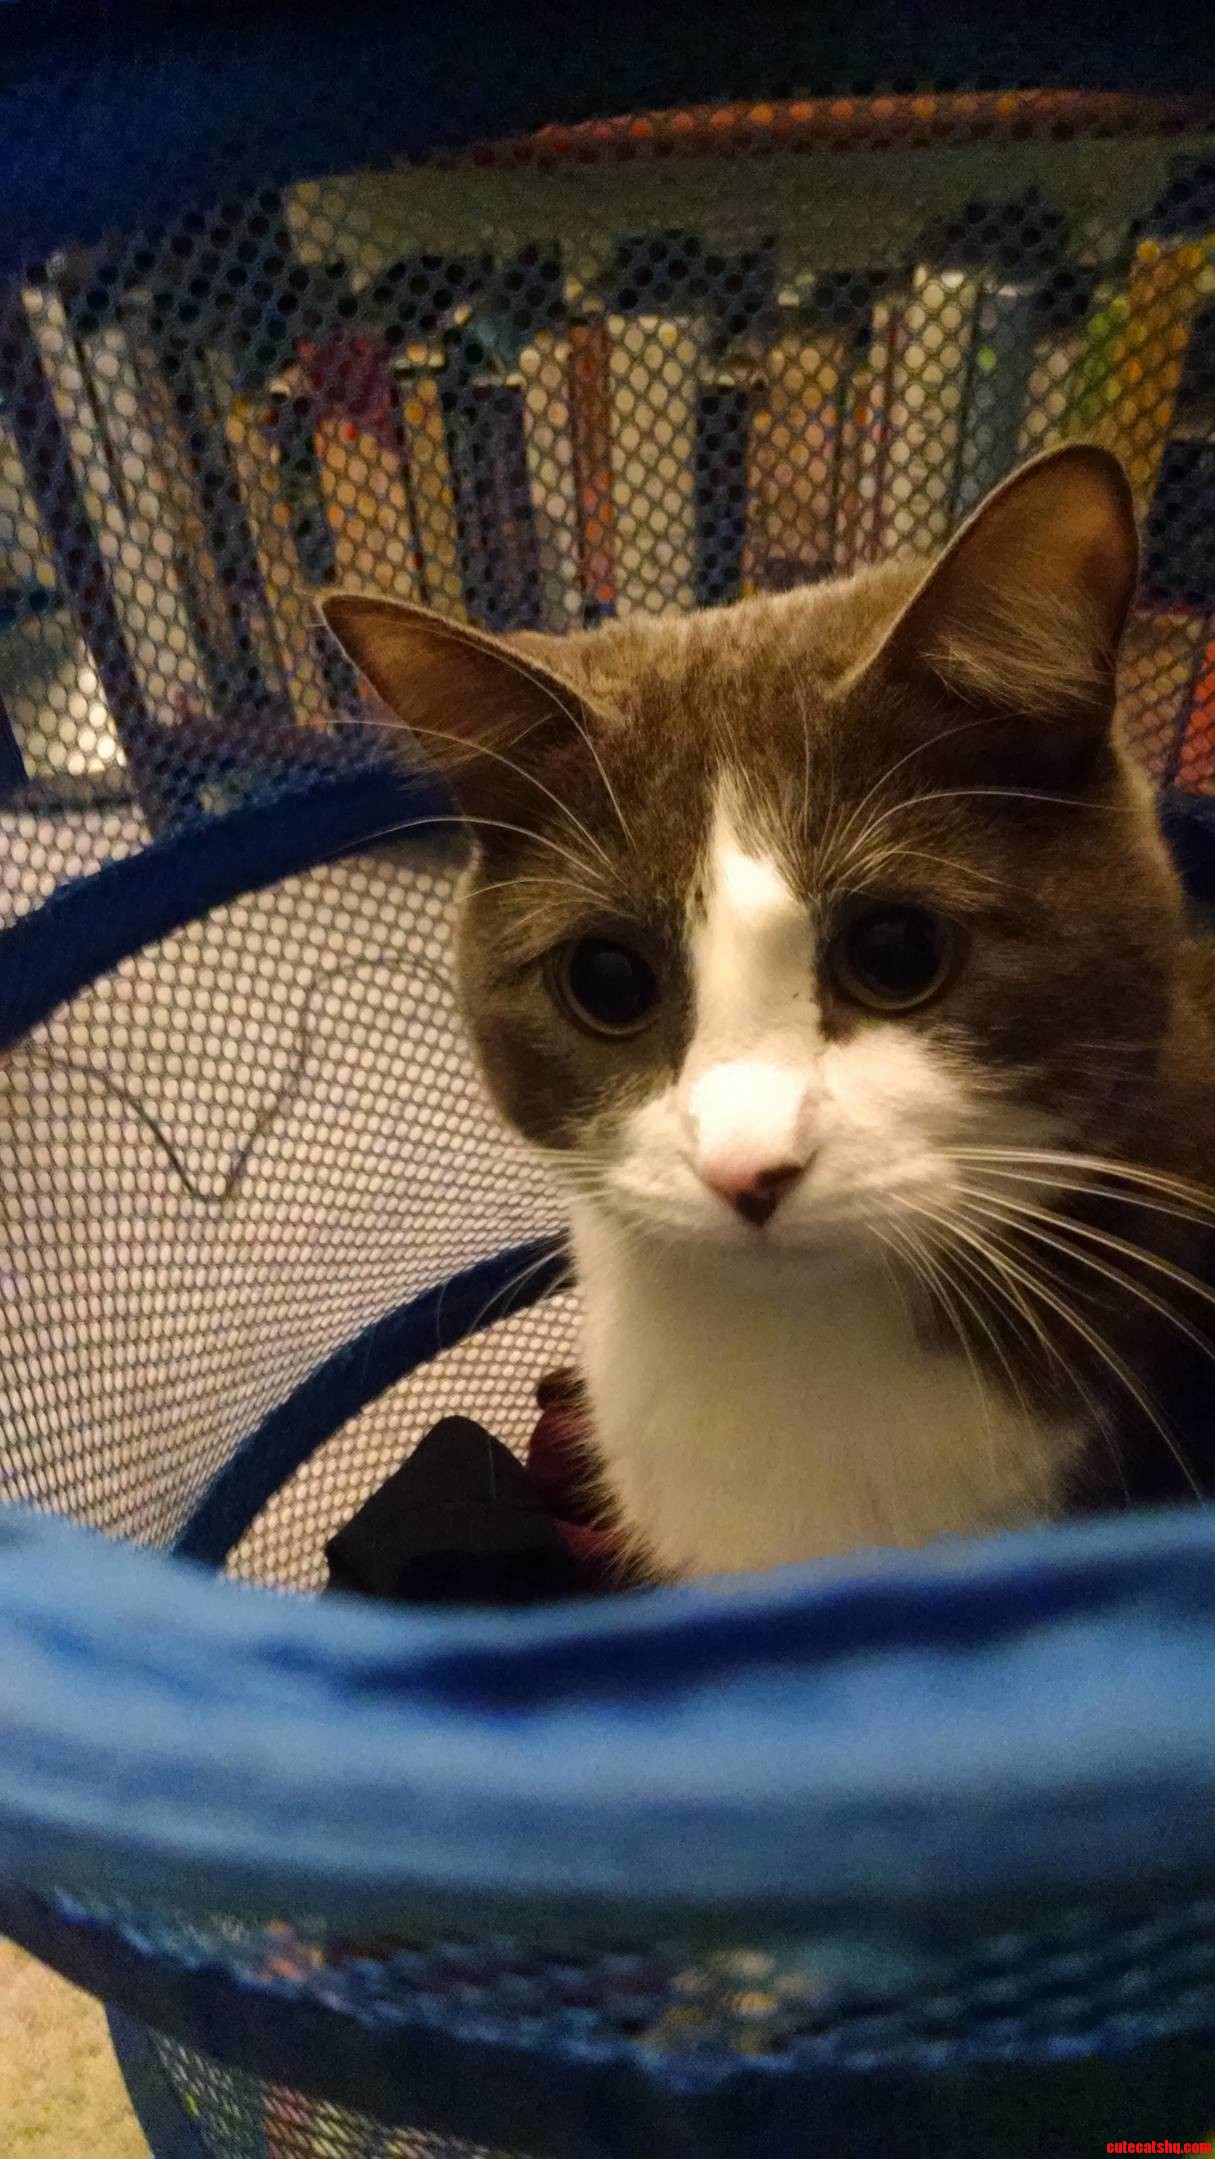 Kitty in the basket